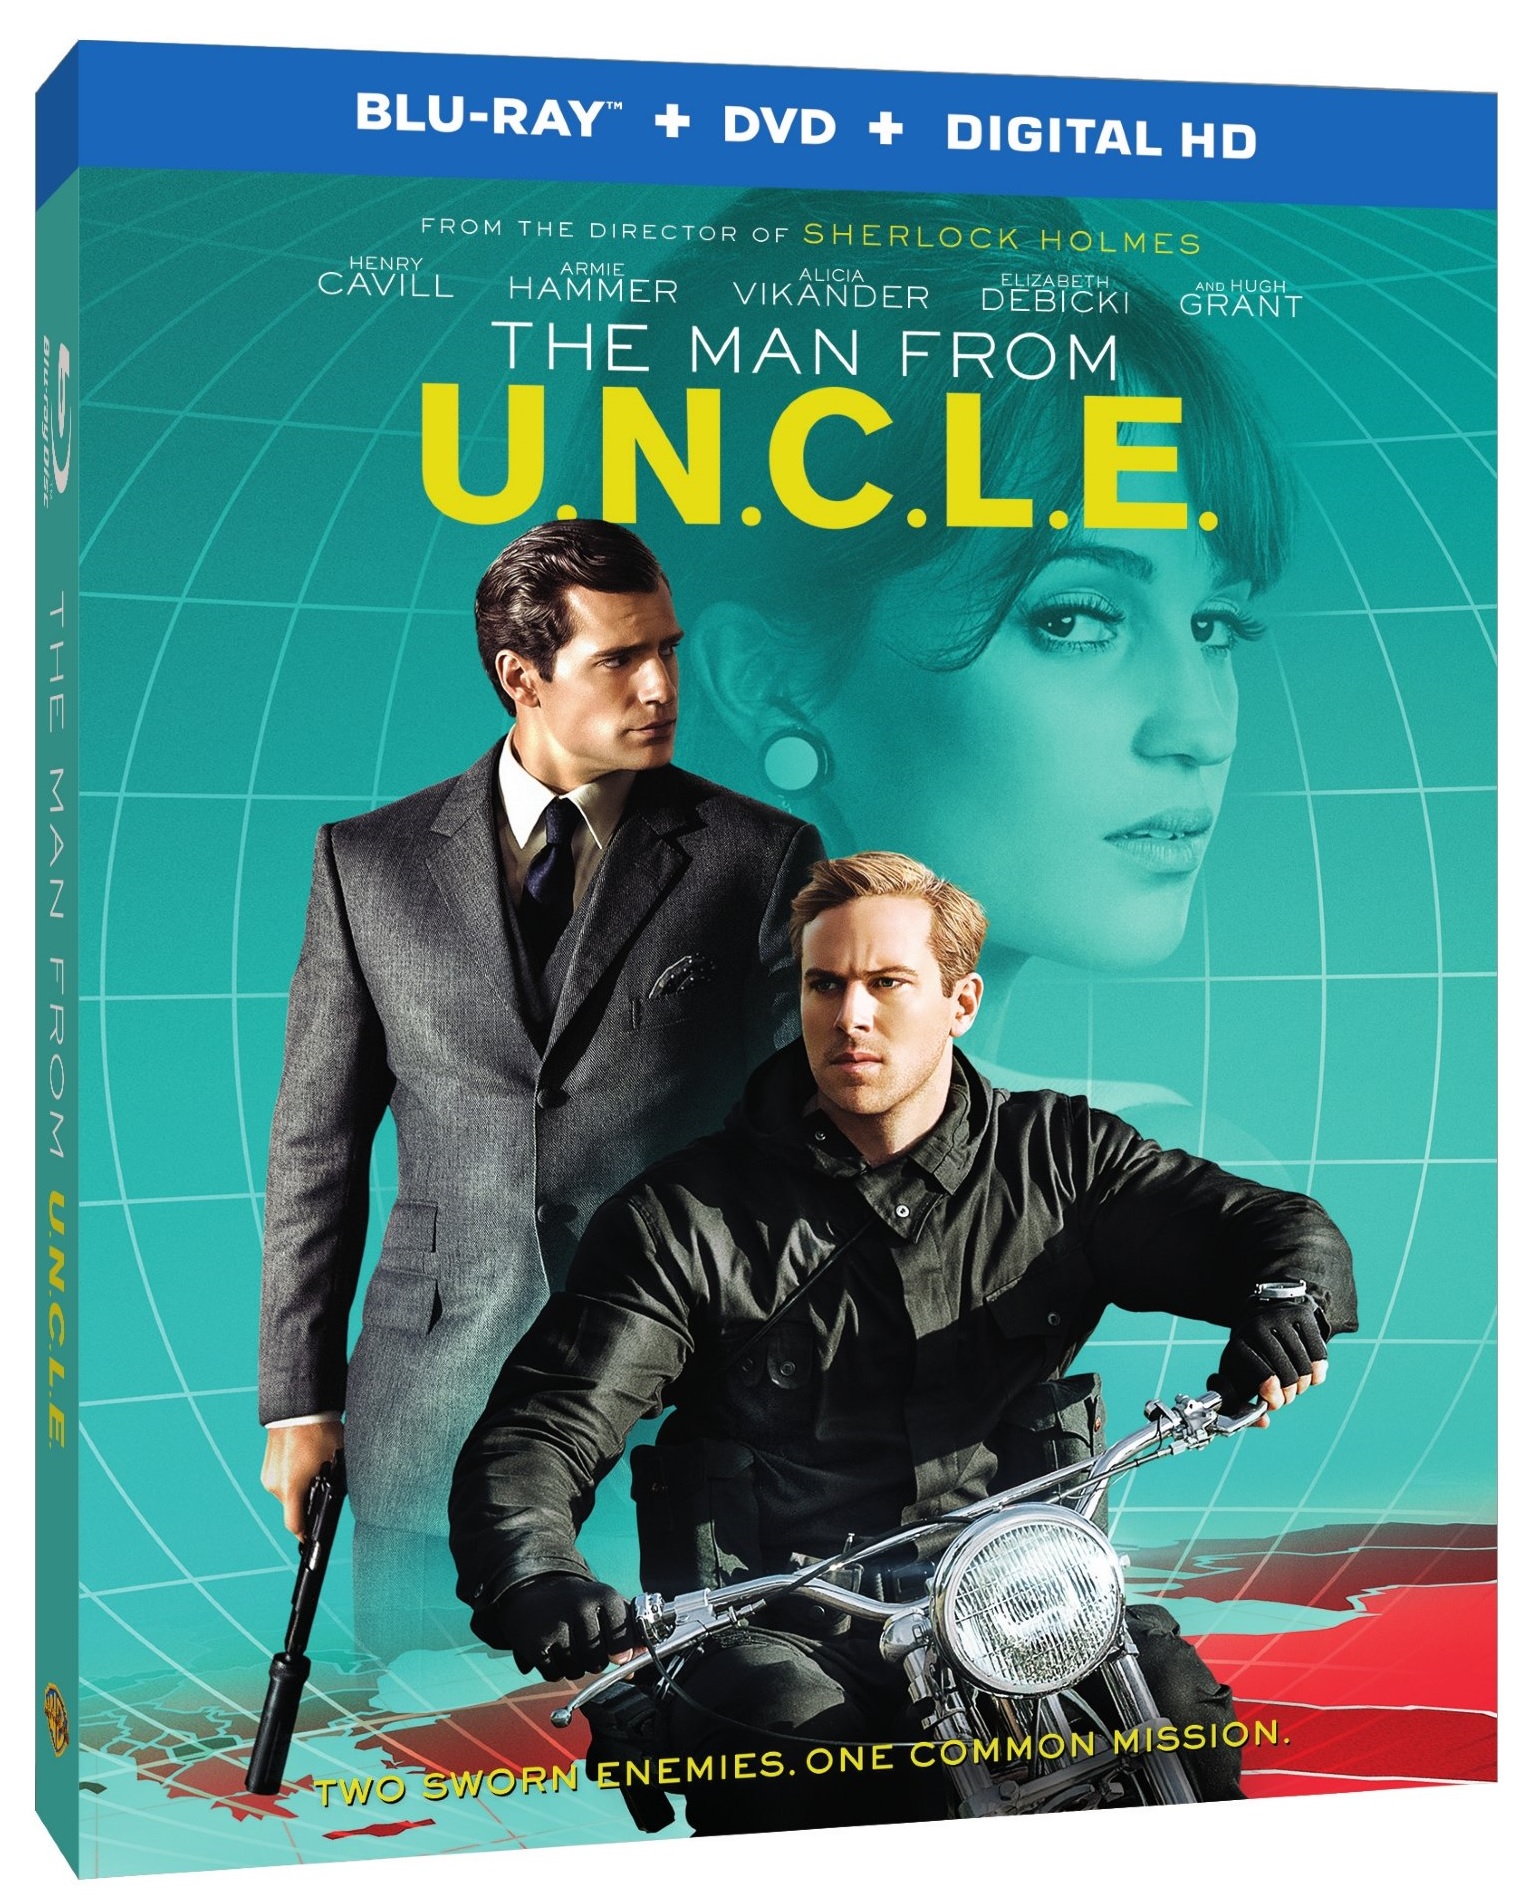 The Man From U.N.C.L.E. Blu-ray Review